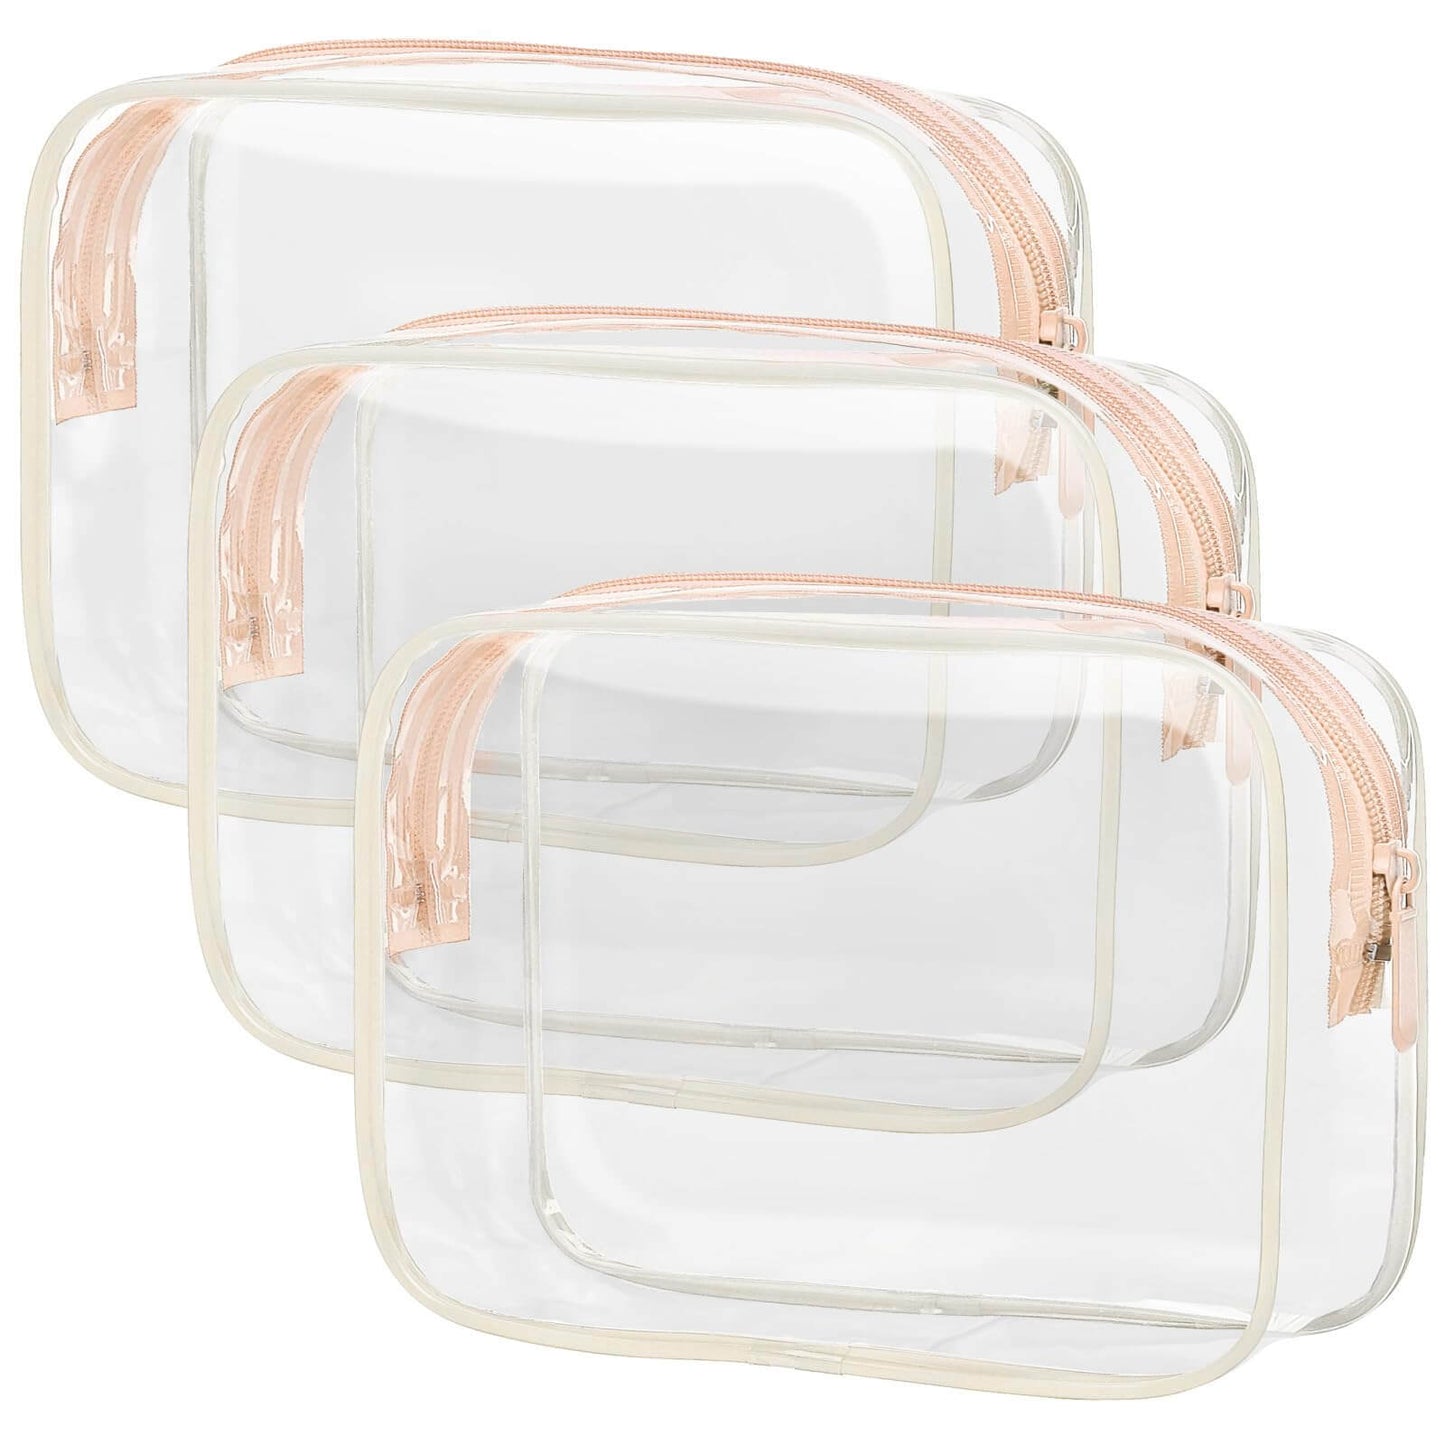 See-through wash bag for travel